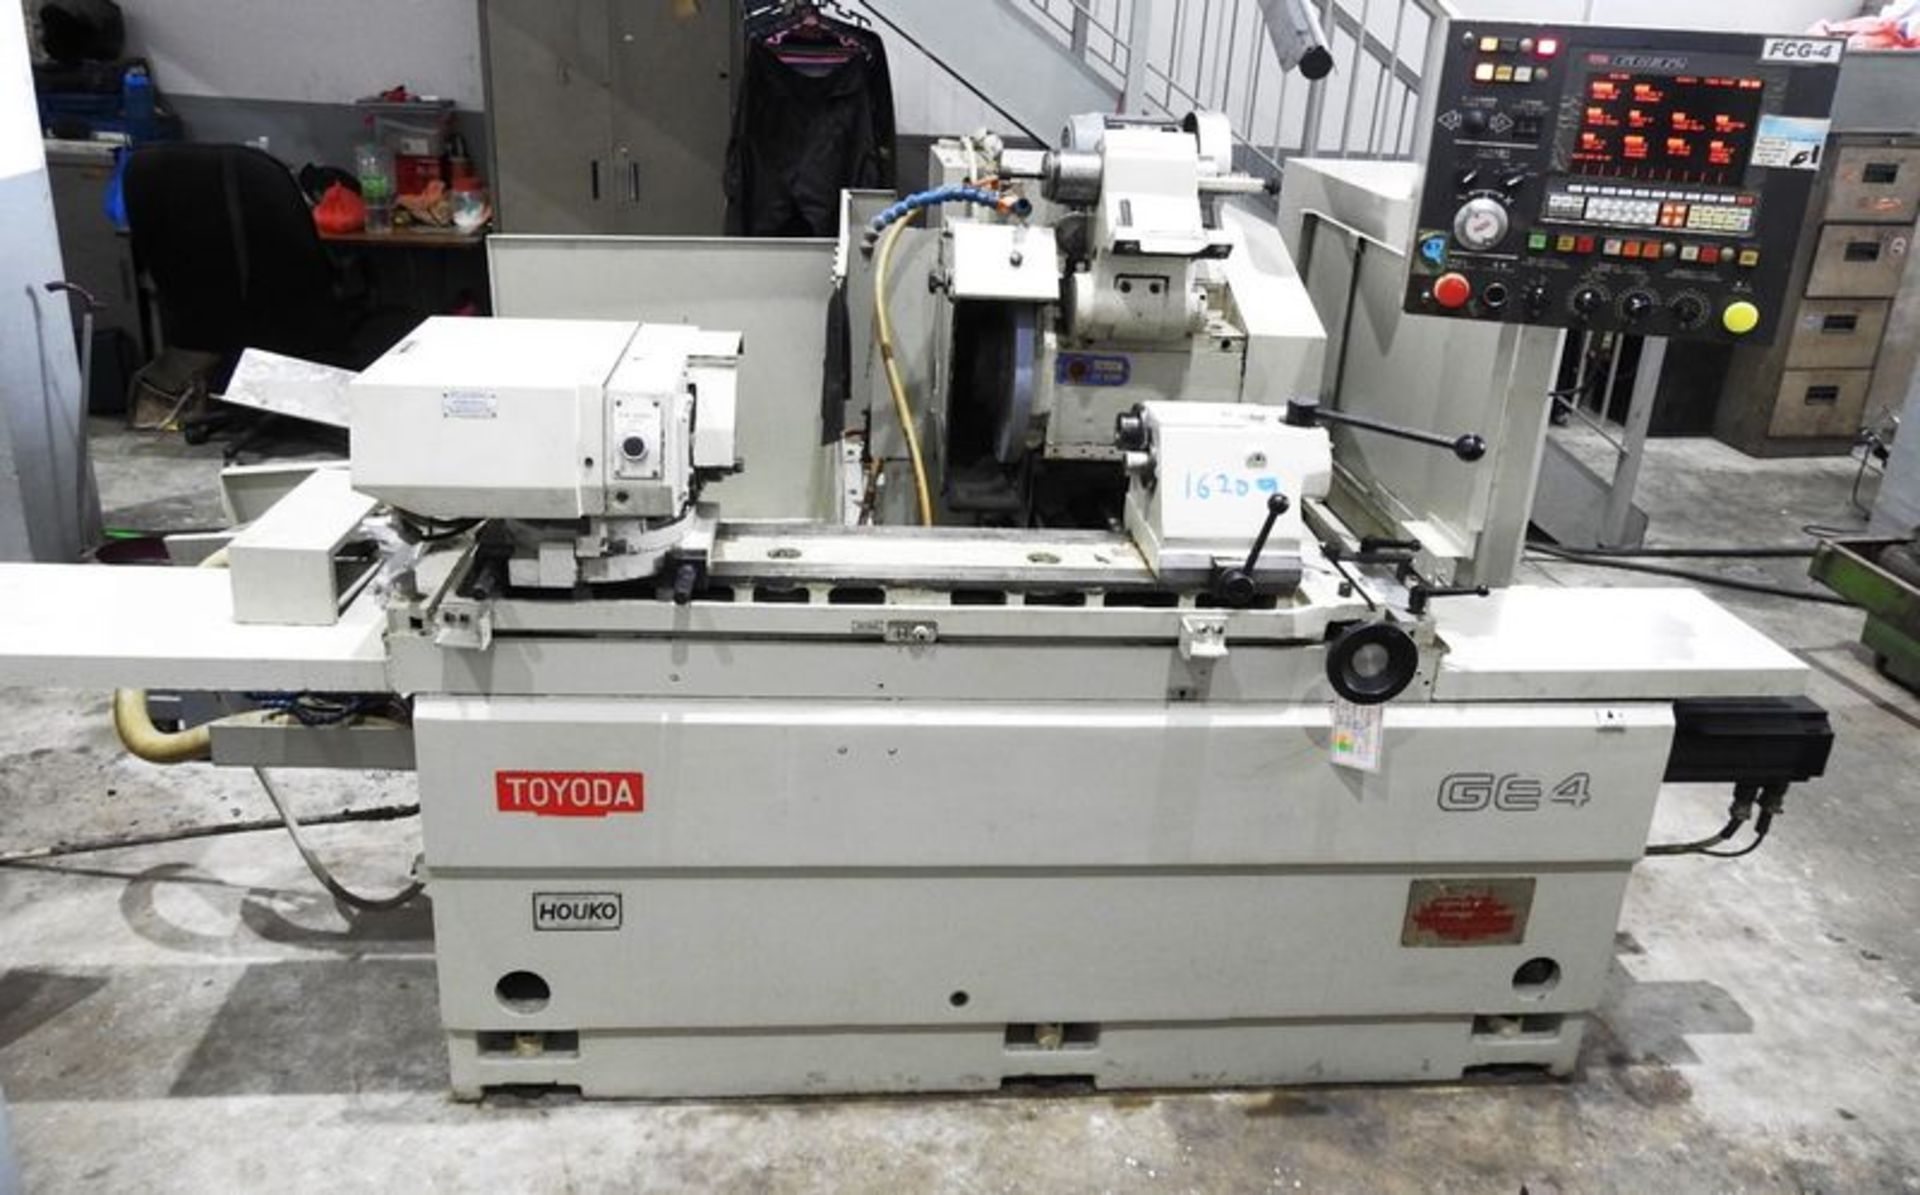 12.6"X19.7" TOYODA GE4P-50 CNC PLAIN CYLINDRICAL GRINDER W/INTERNAL GRINDING ATTACHMENT - Image 6 of 8